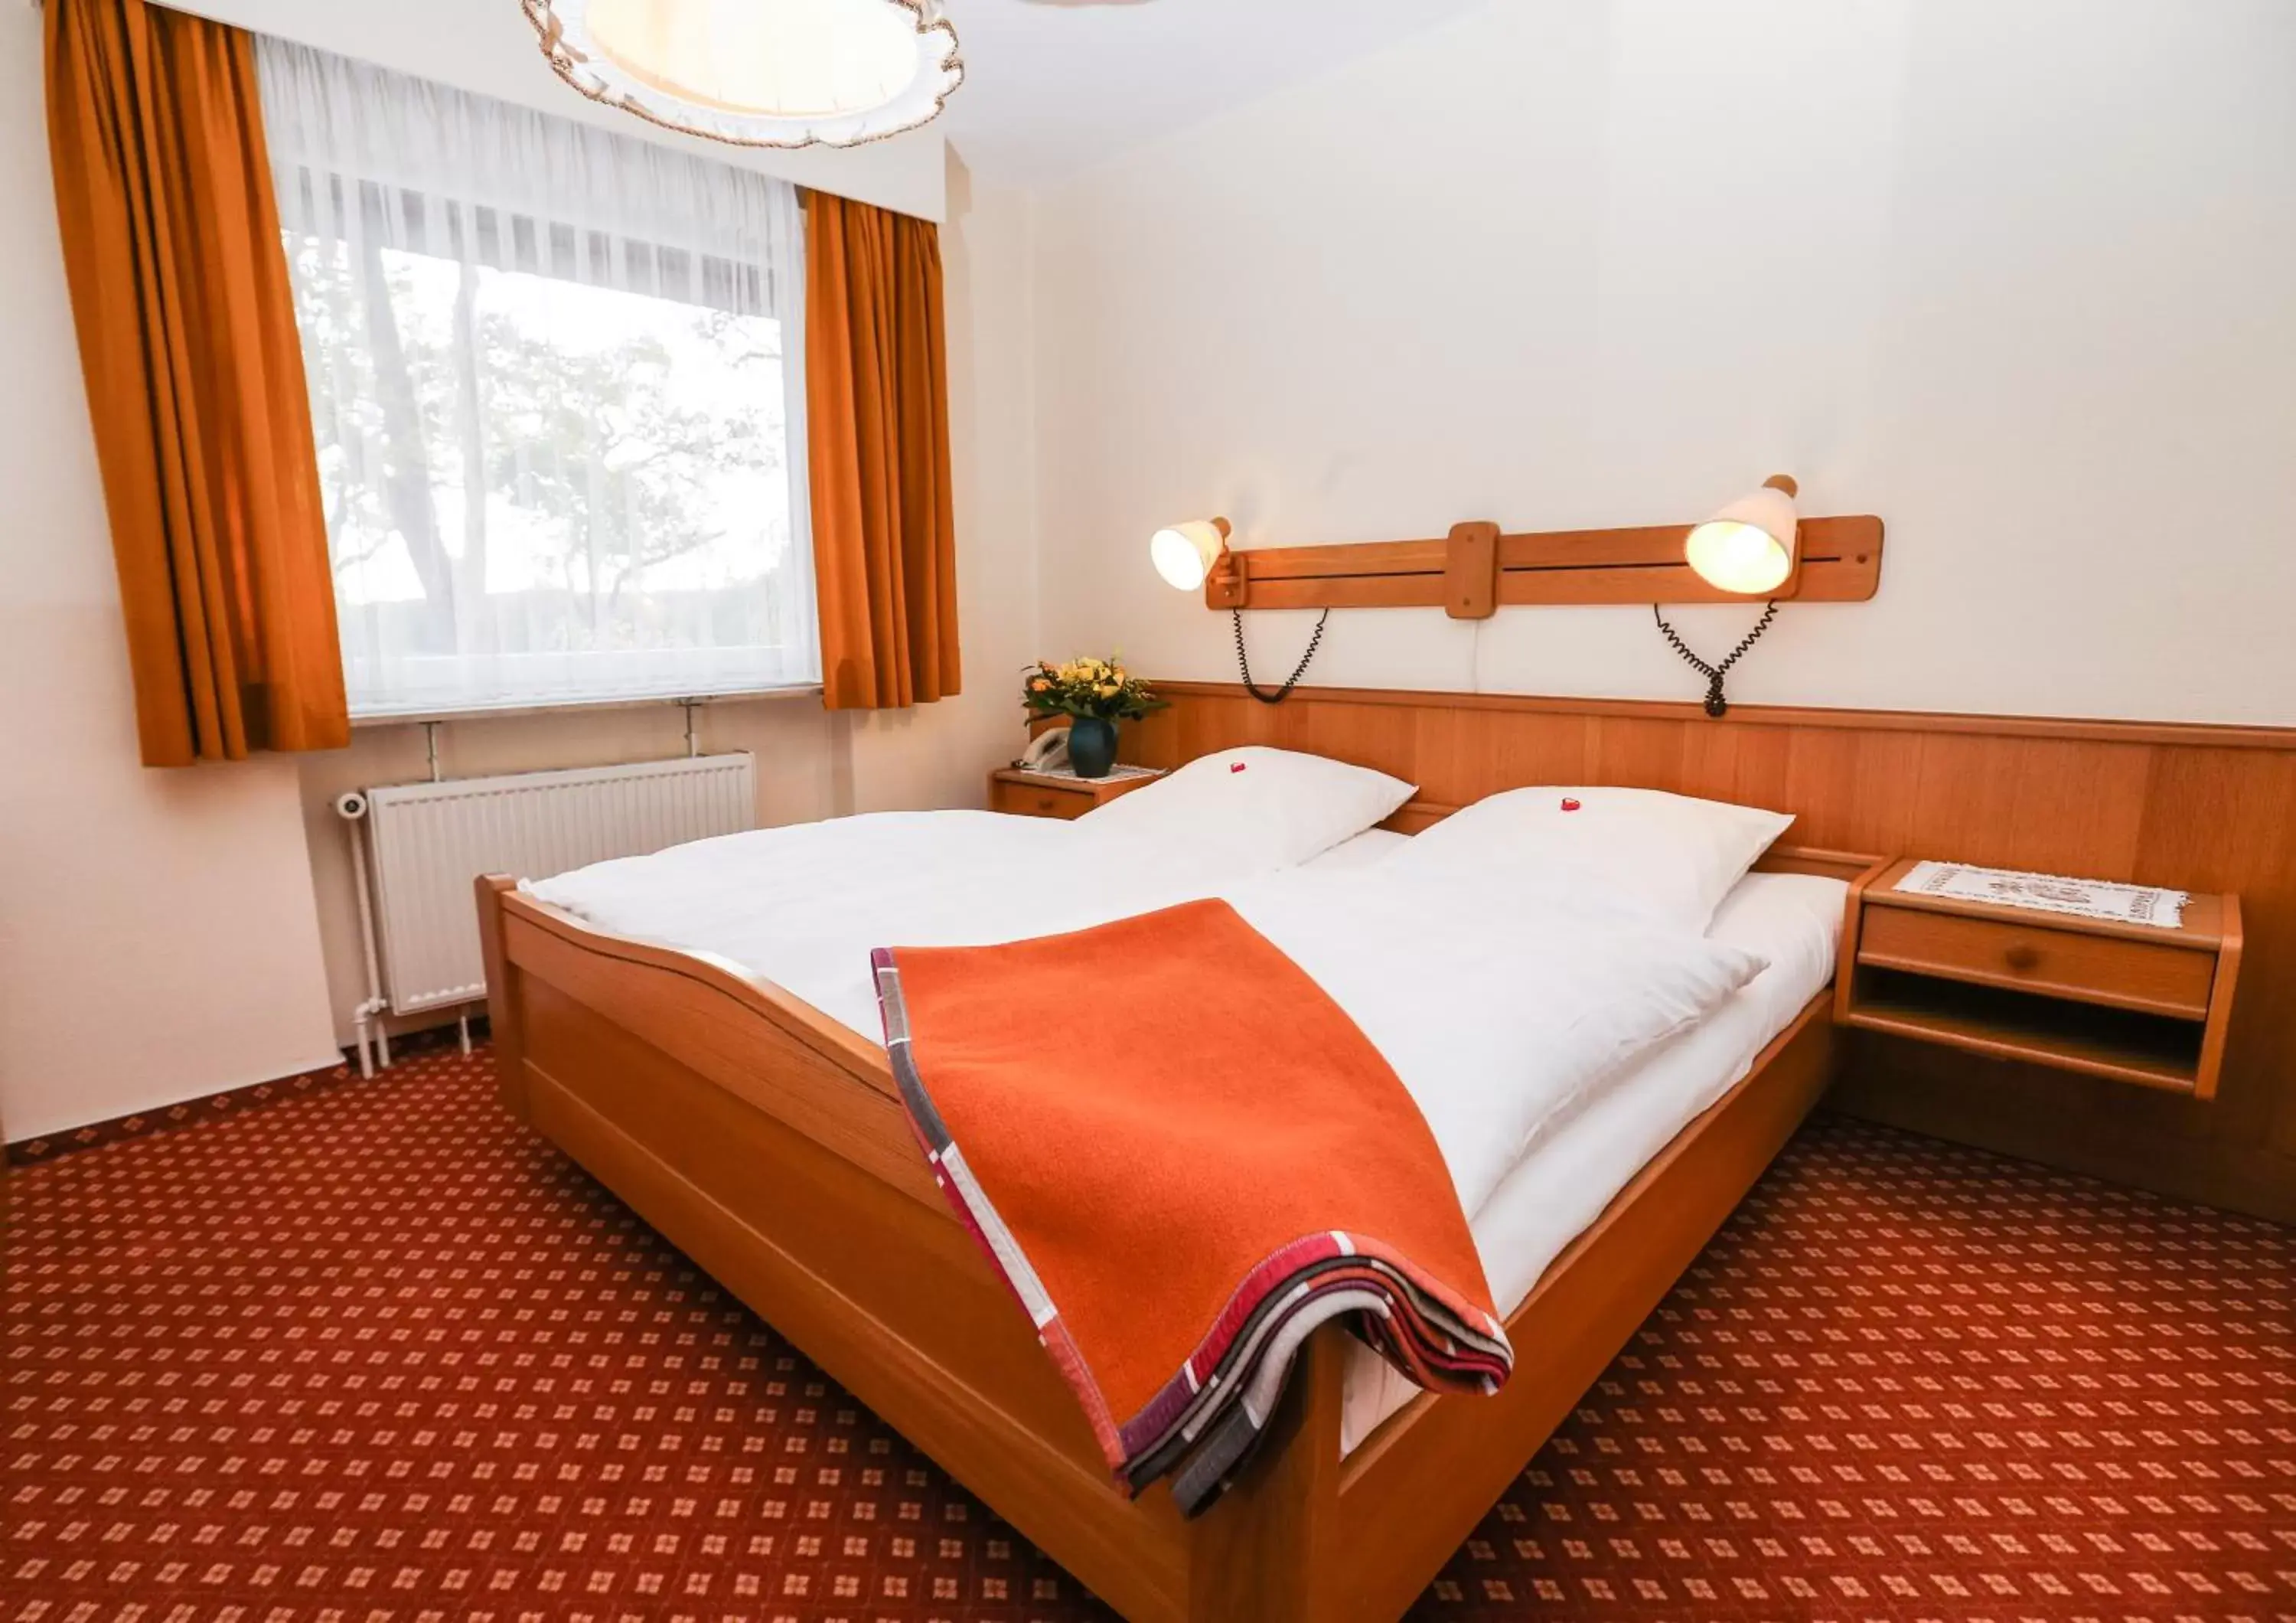 Double Room with Private Bathroom in Studtmann's Gasthof